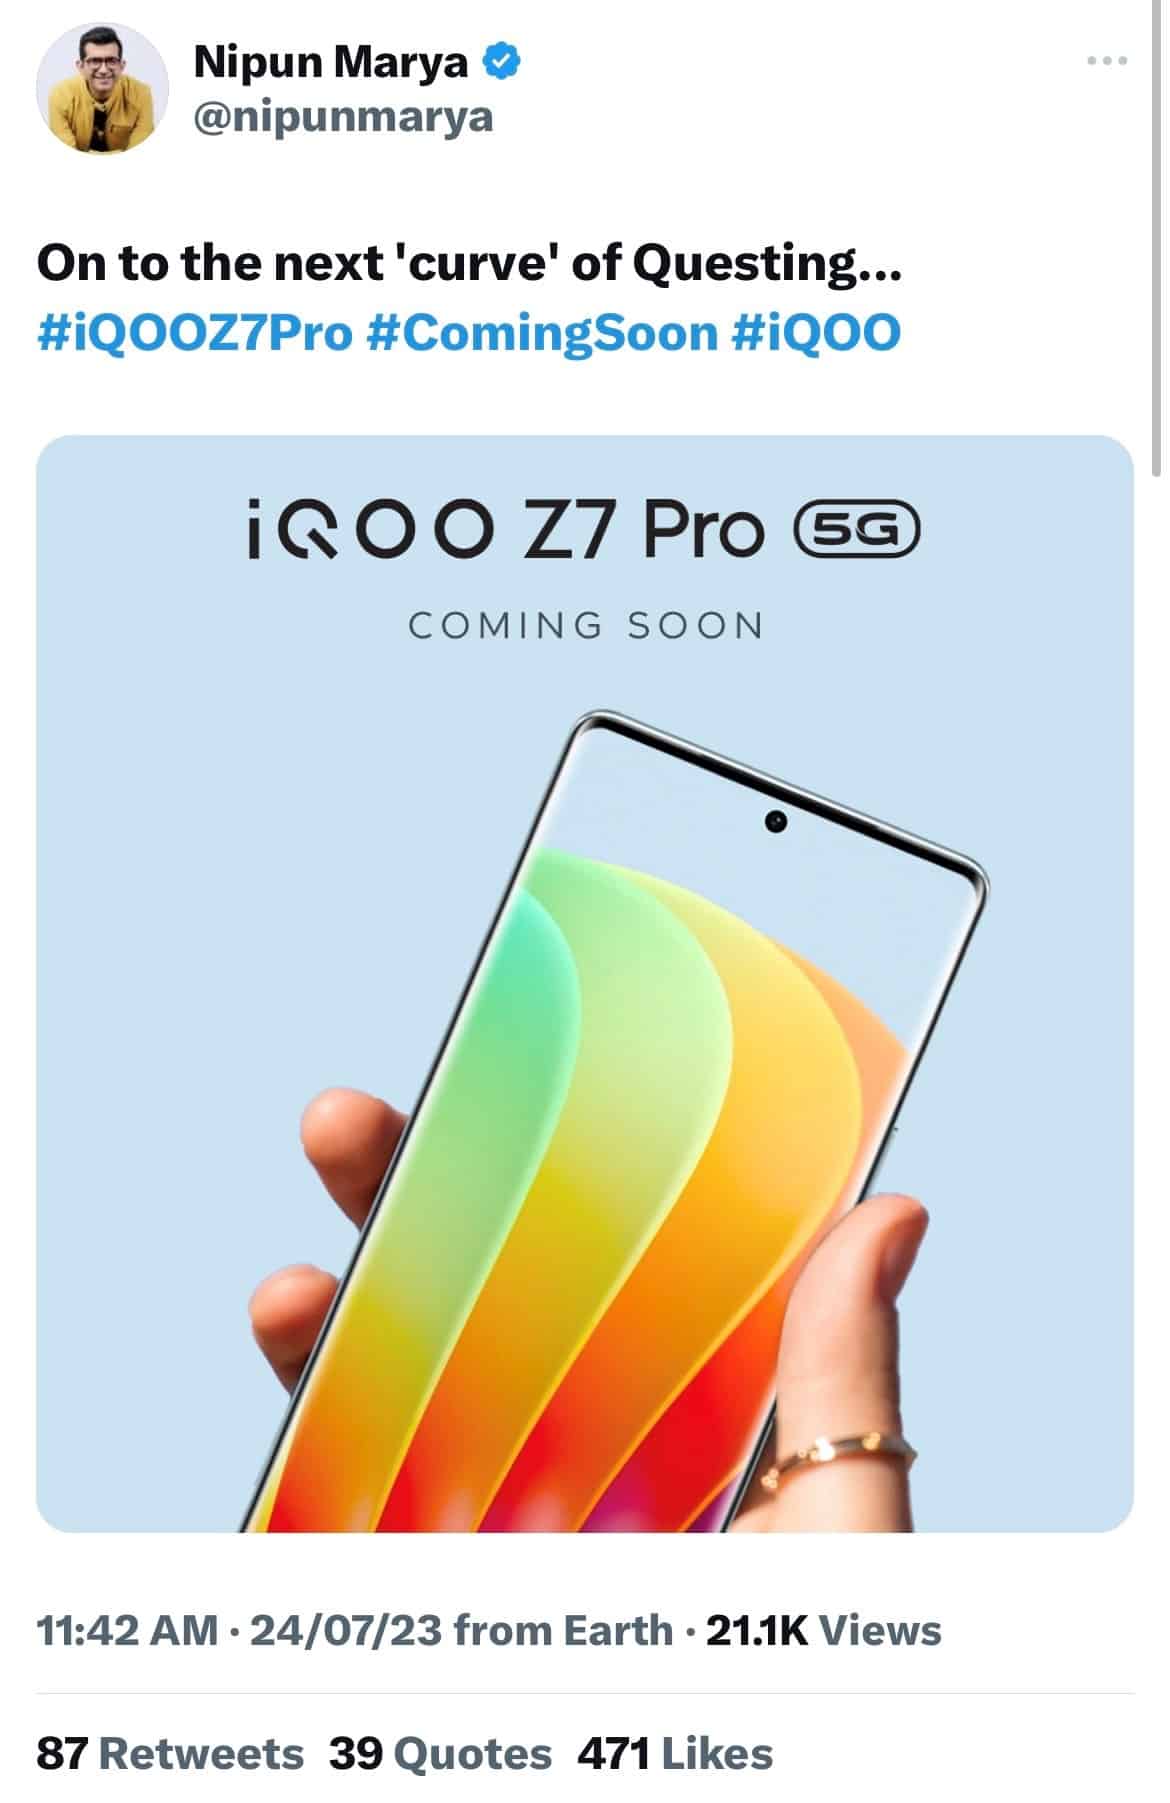 iQOO Z7 Pro’s Launch Date to be Confirmed